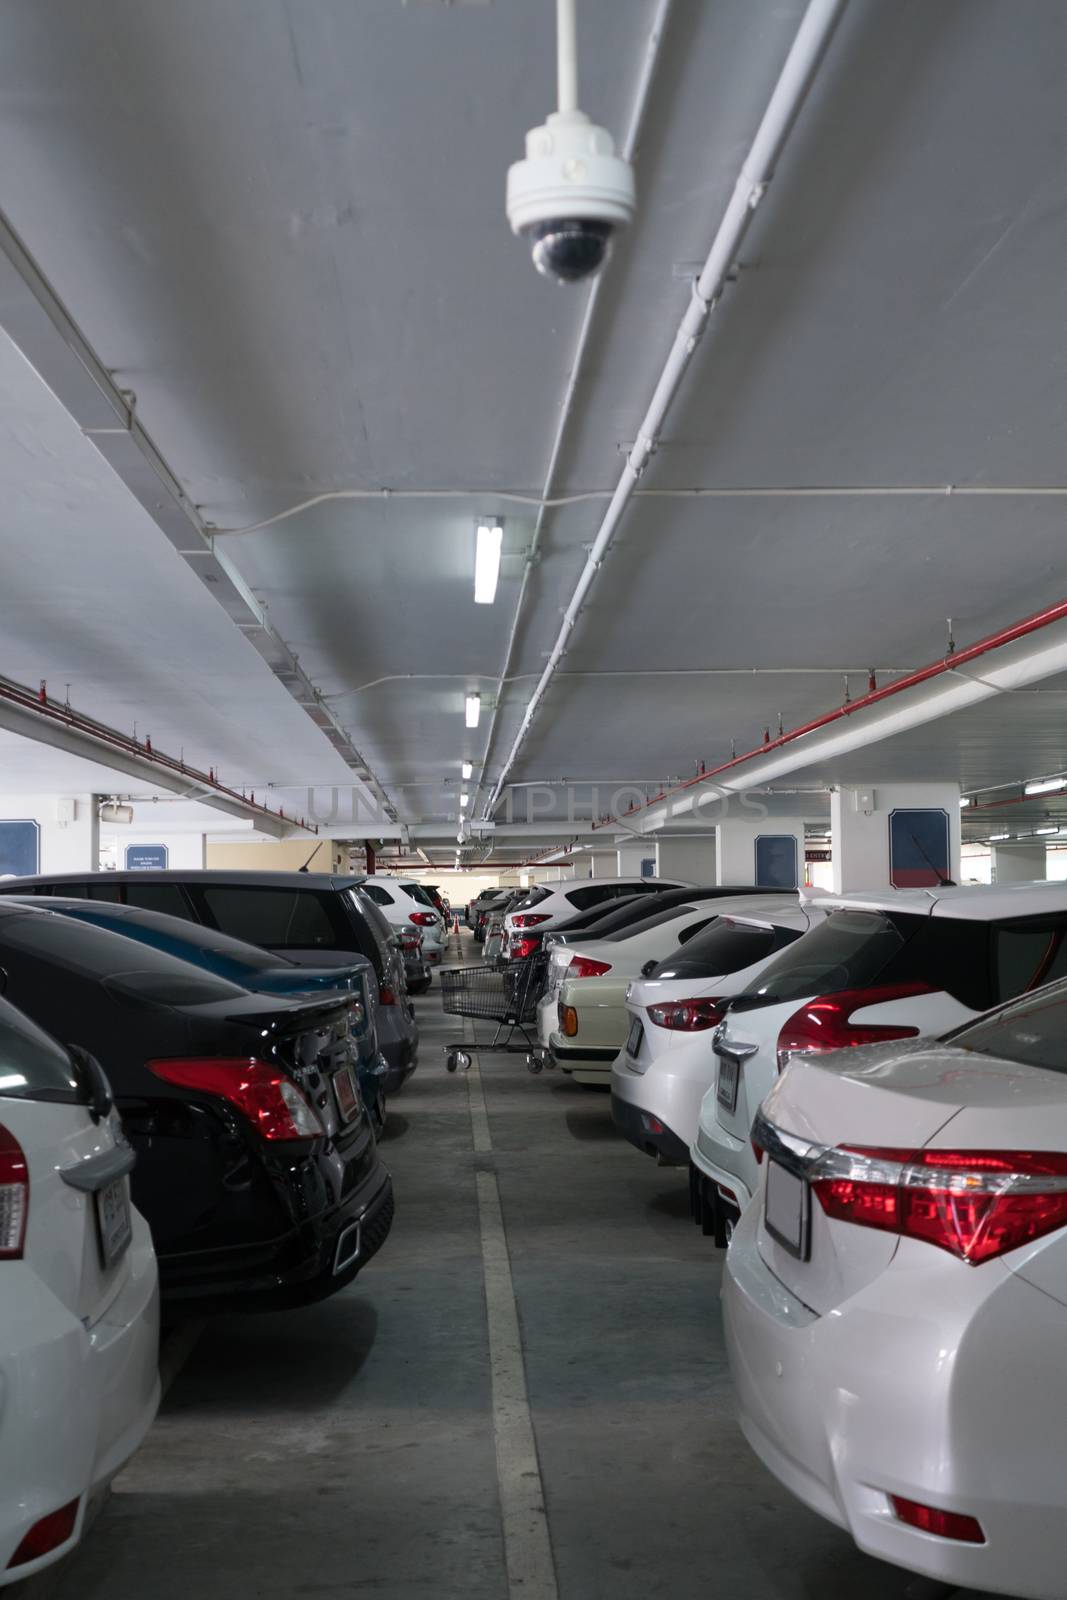 parking lot indoor with cars